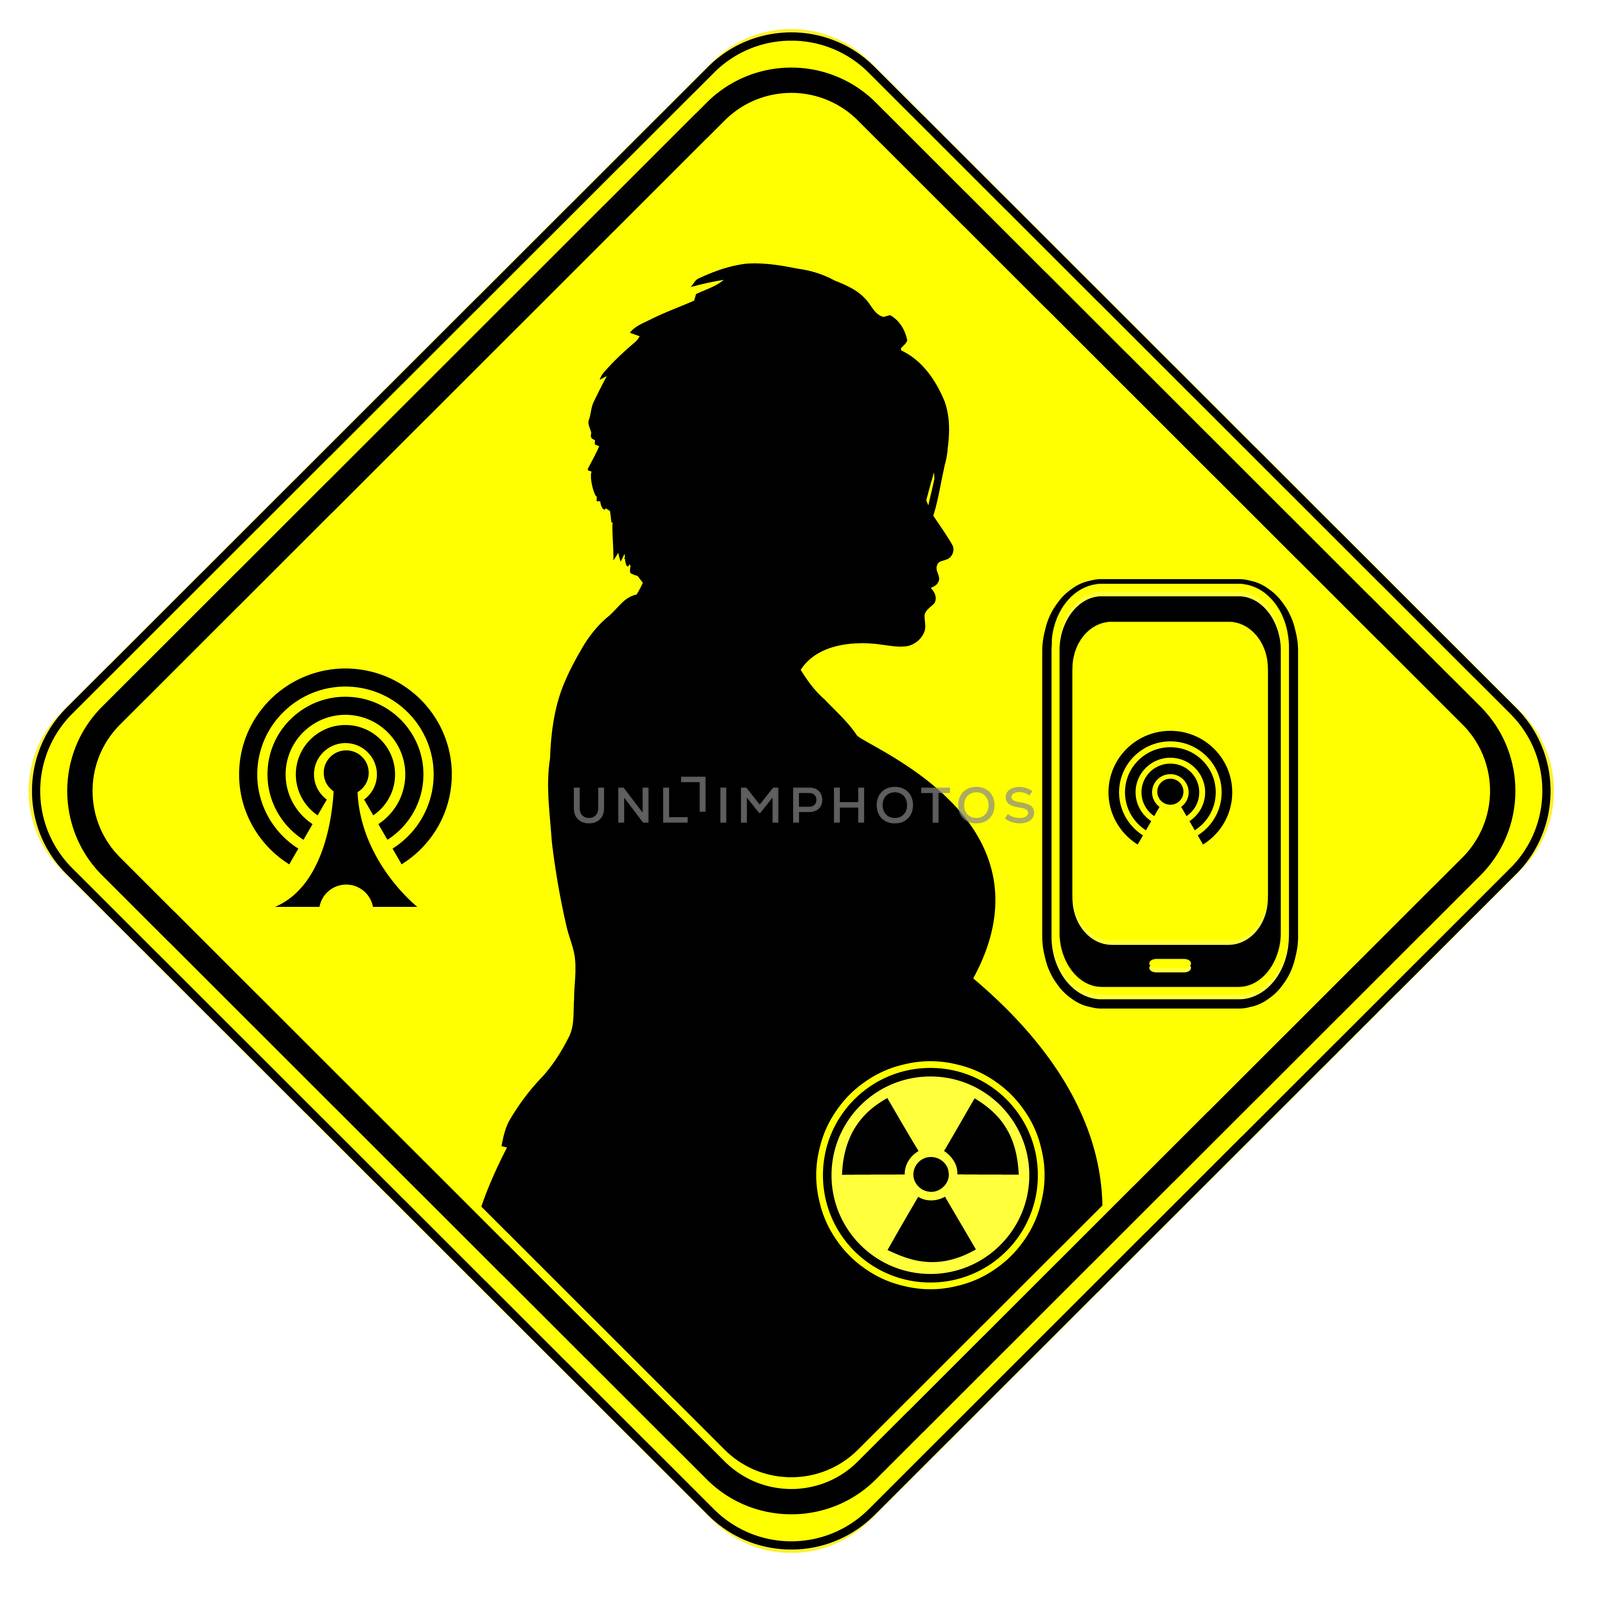 Wi-Fi exposure and wireless radiation can harm the unborn baby